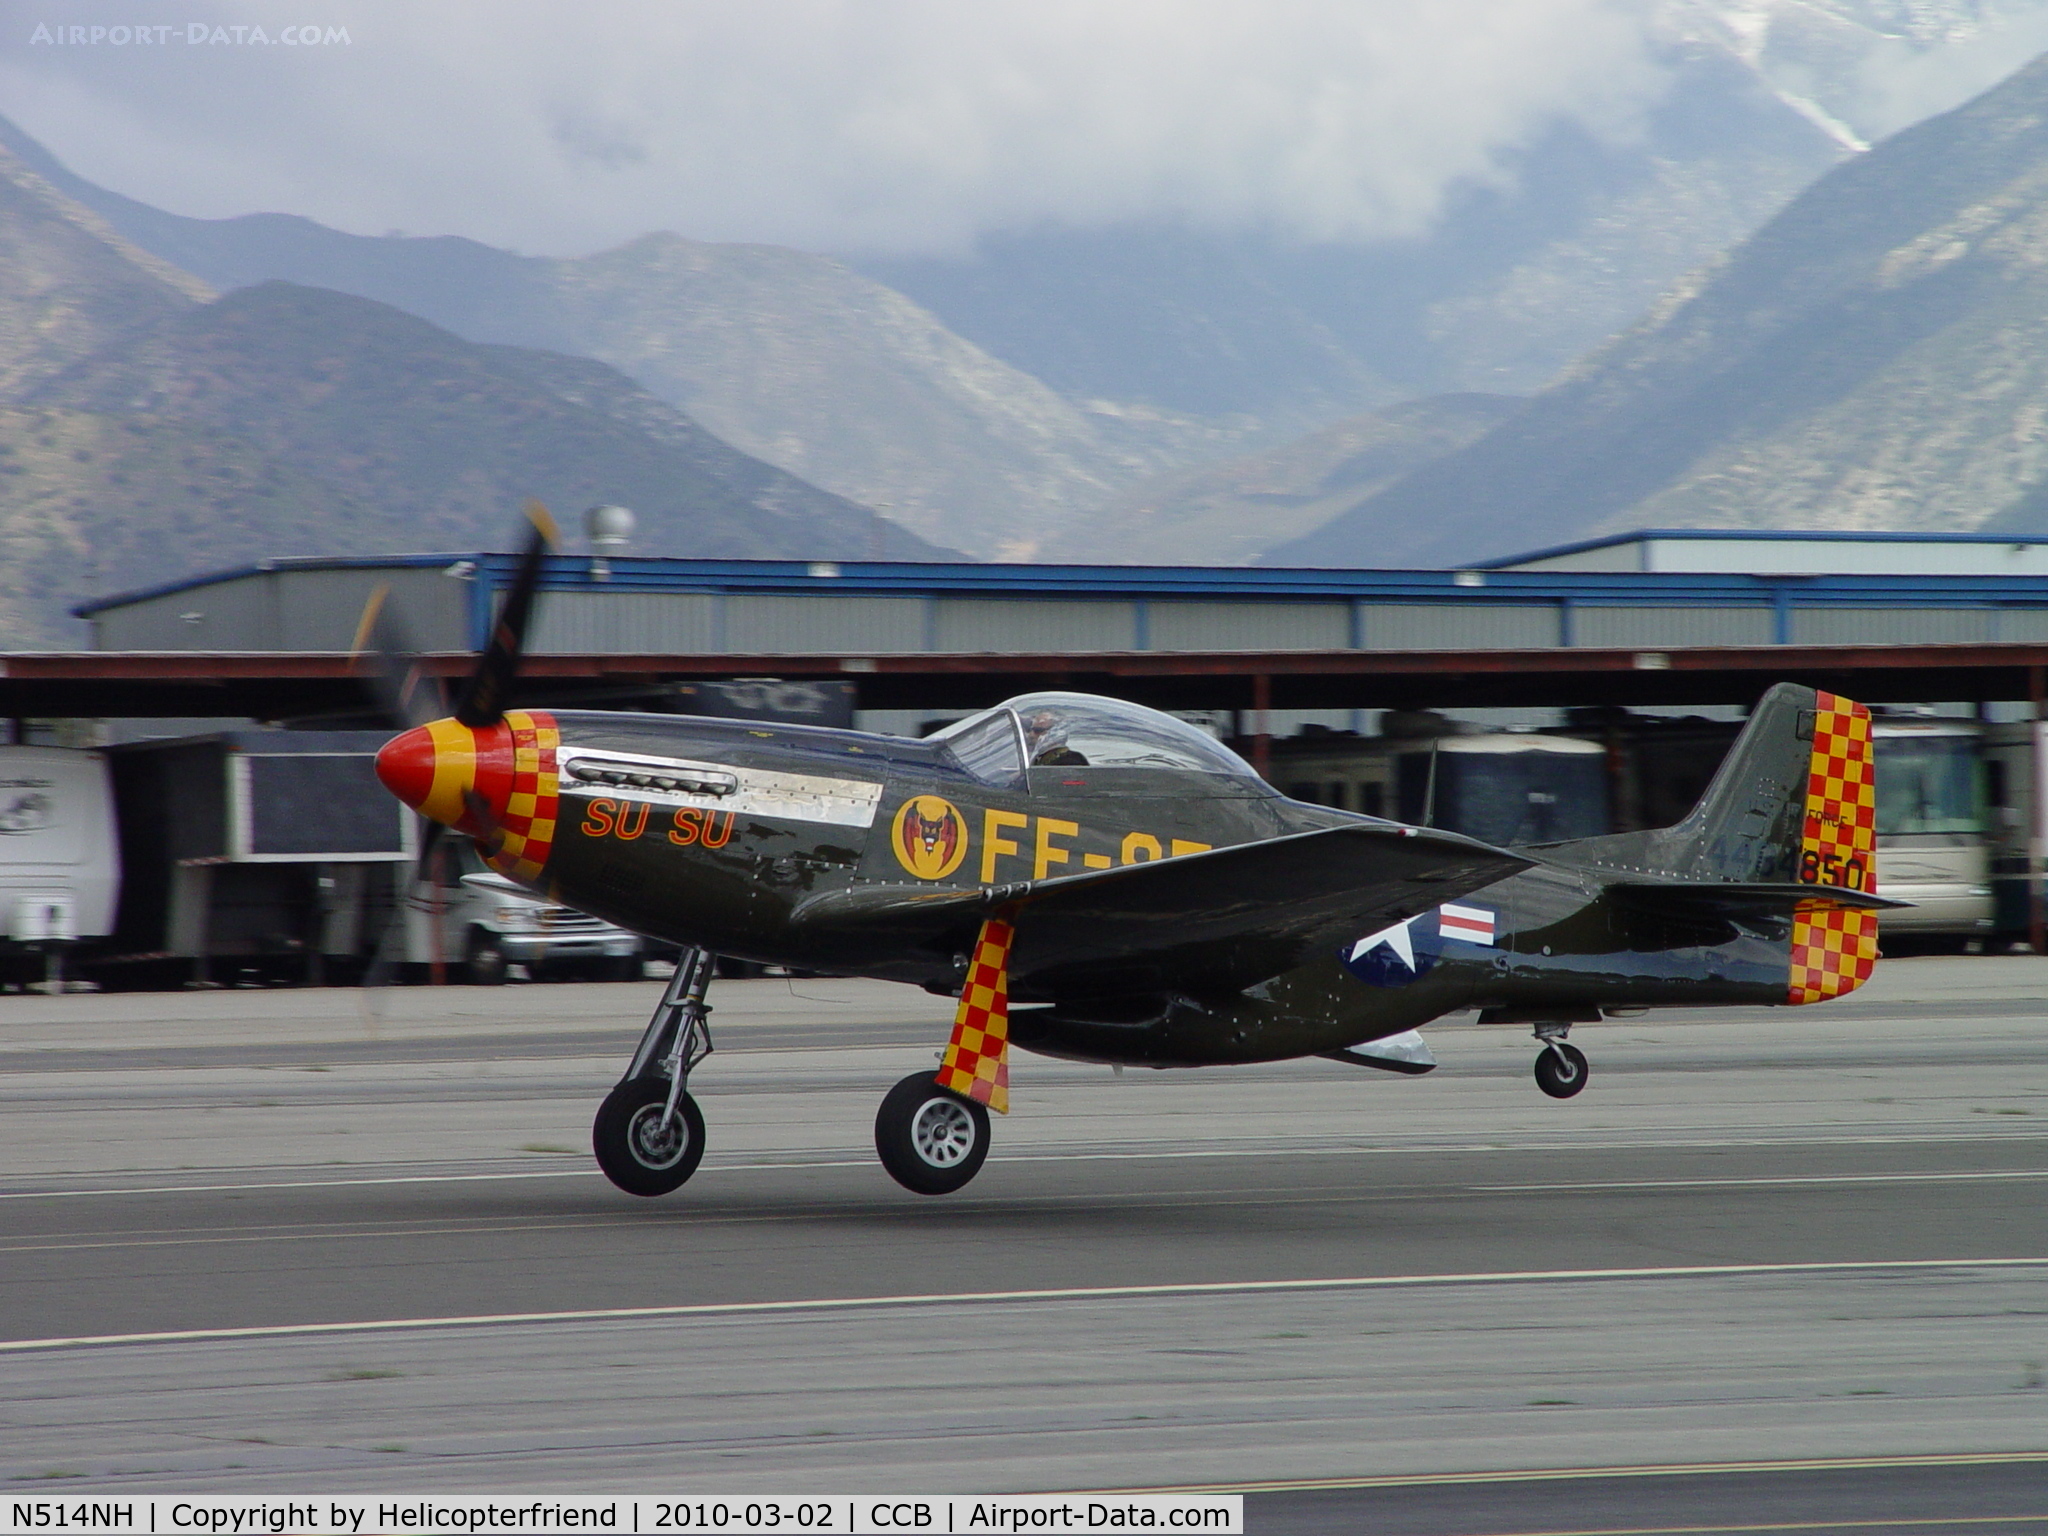 N514NH, 1944 North American P-51D Mustang C/N 122-44706  (44-84850), Taking off westbound from runway 24